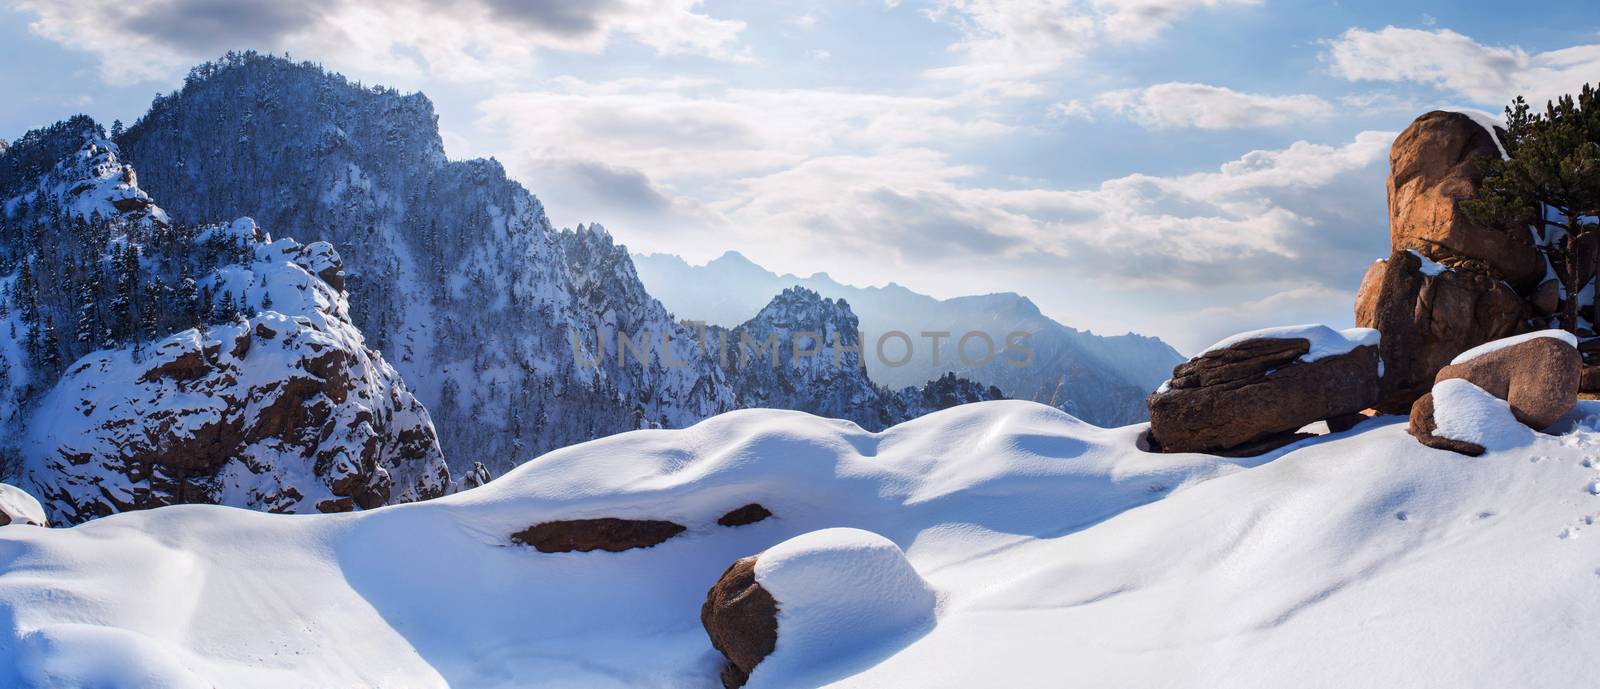 Seoraksan mountains in winter,Famous mountain in South Korea by gutarphotoghaphy